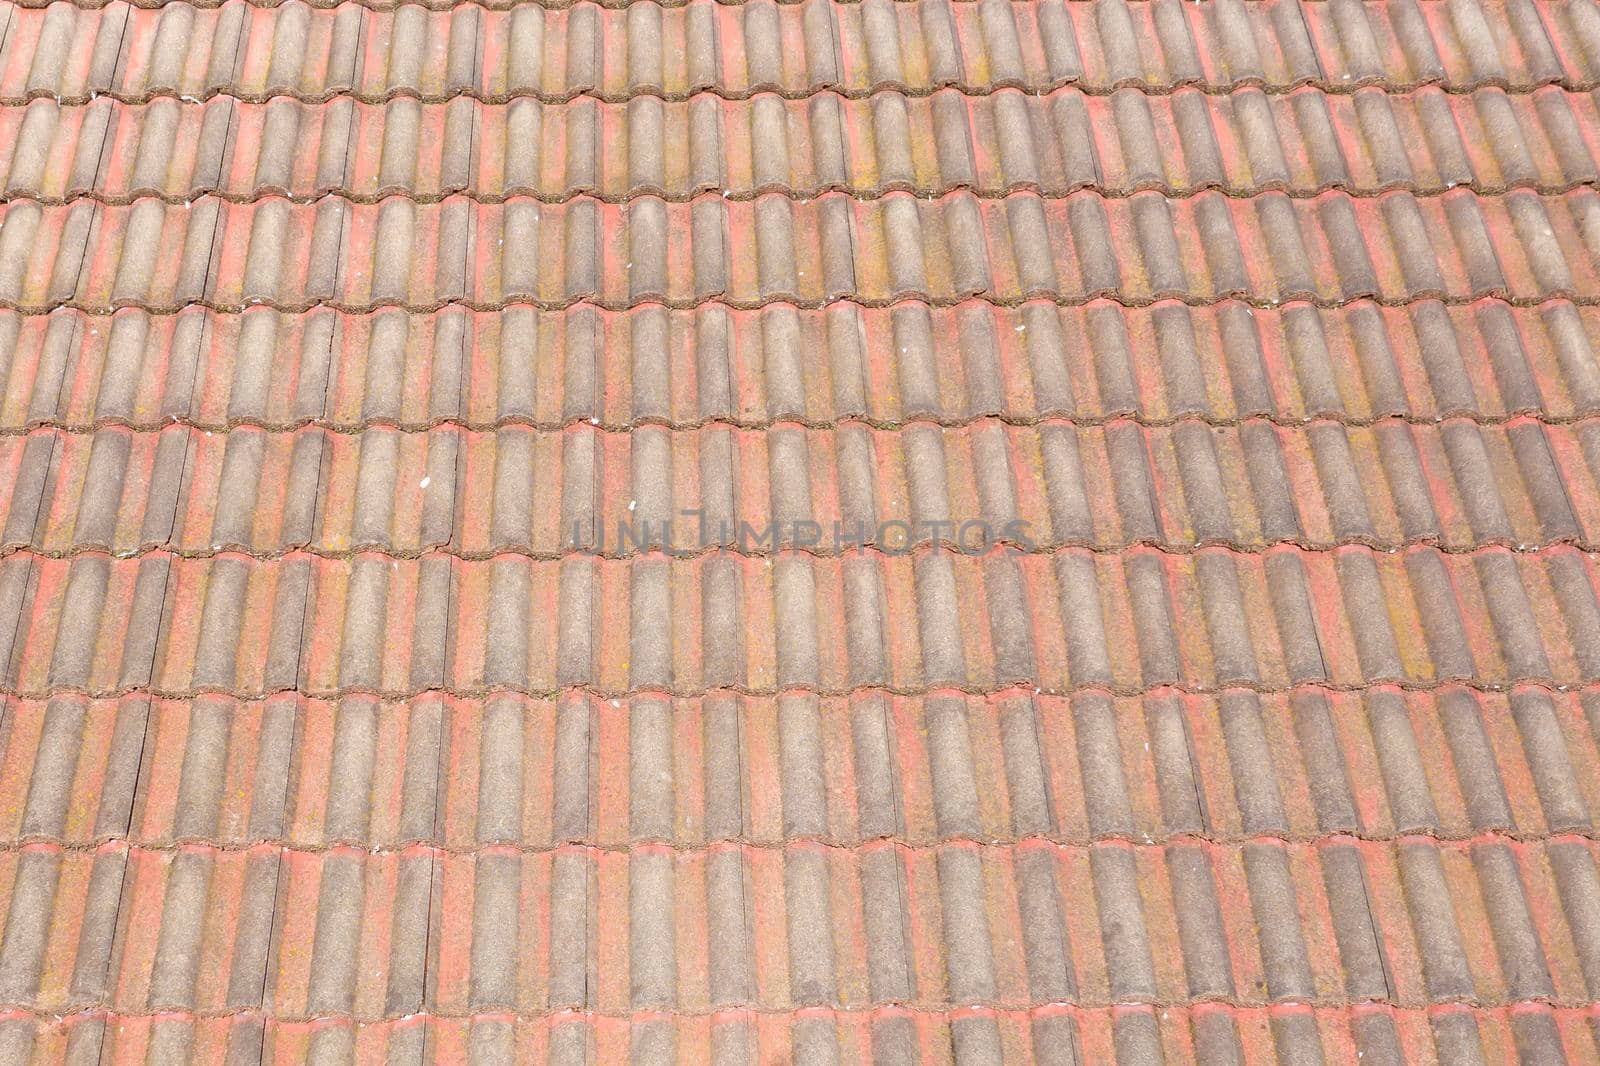 An old brown terracotta tiled roof on a house by WittkePhotos